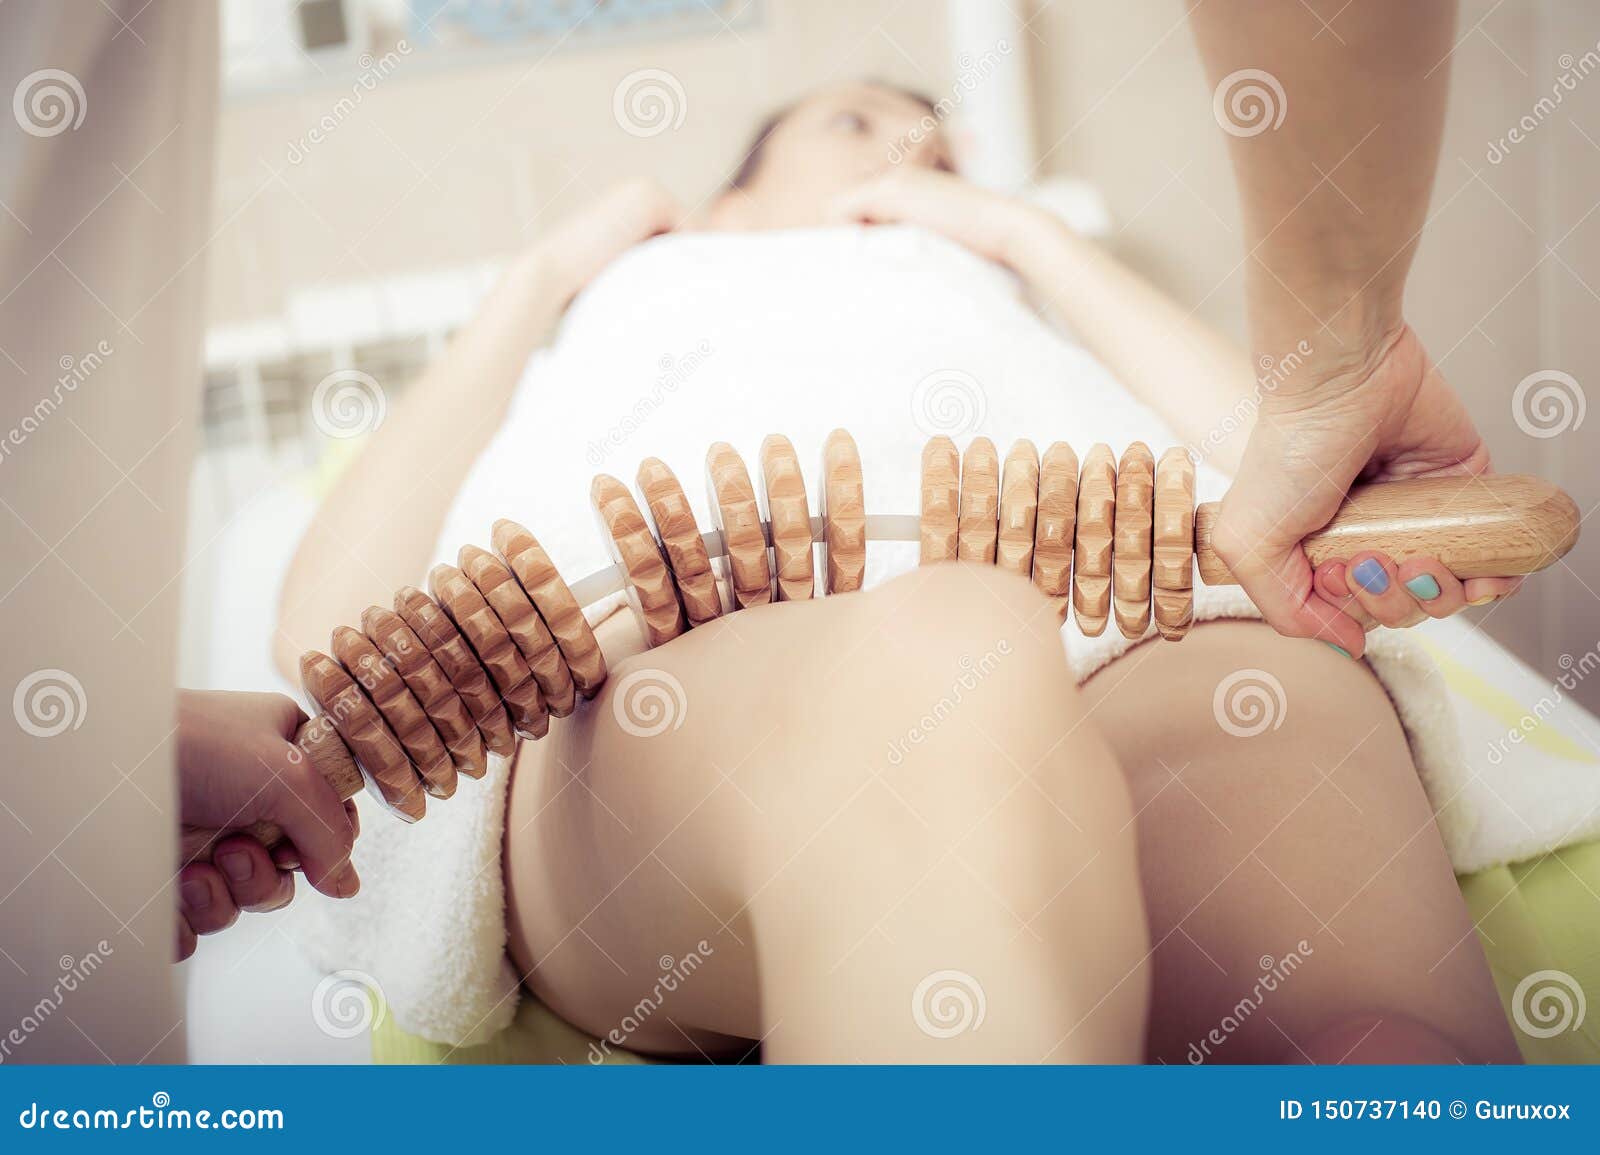 young woman having a maderotherapy massage treatment at spa salon